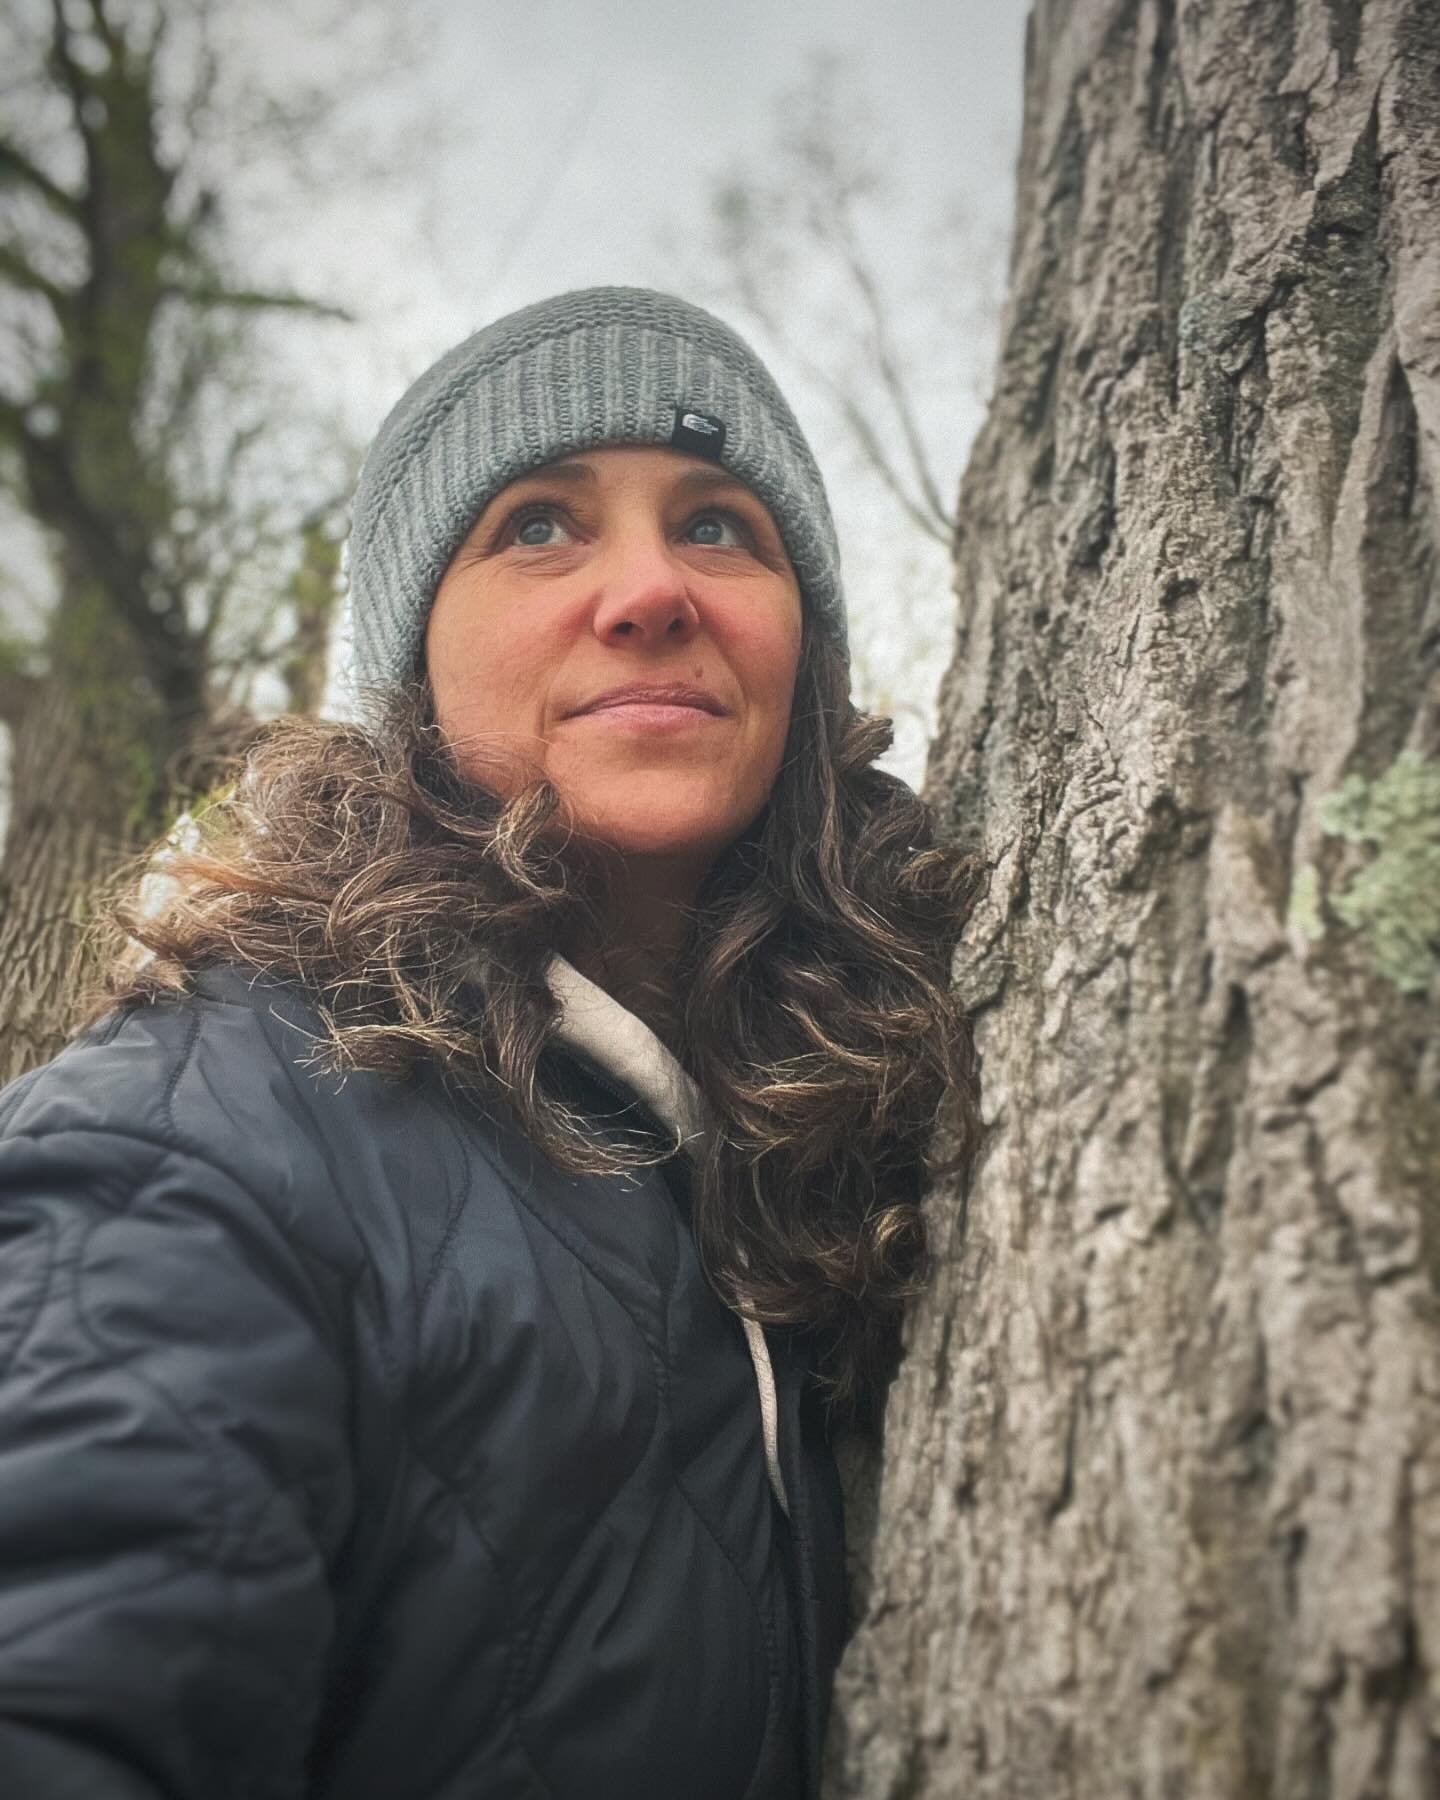 Feeling overwhelmed with life?

Pause
.
Breathe
.
Allow yourself a break
.
Hug a tree
.
Walk in grass barefoot 
.
Repeat your gratitude list
.
What do you do when you&rsquo;re overwhelmed? 👇
.
.
.#newmom #wildmom #naturalmom #naturalmomma #tarajgreg